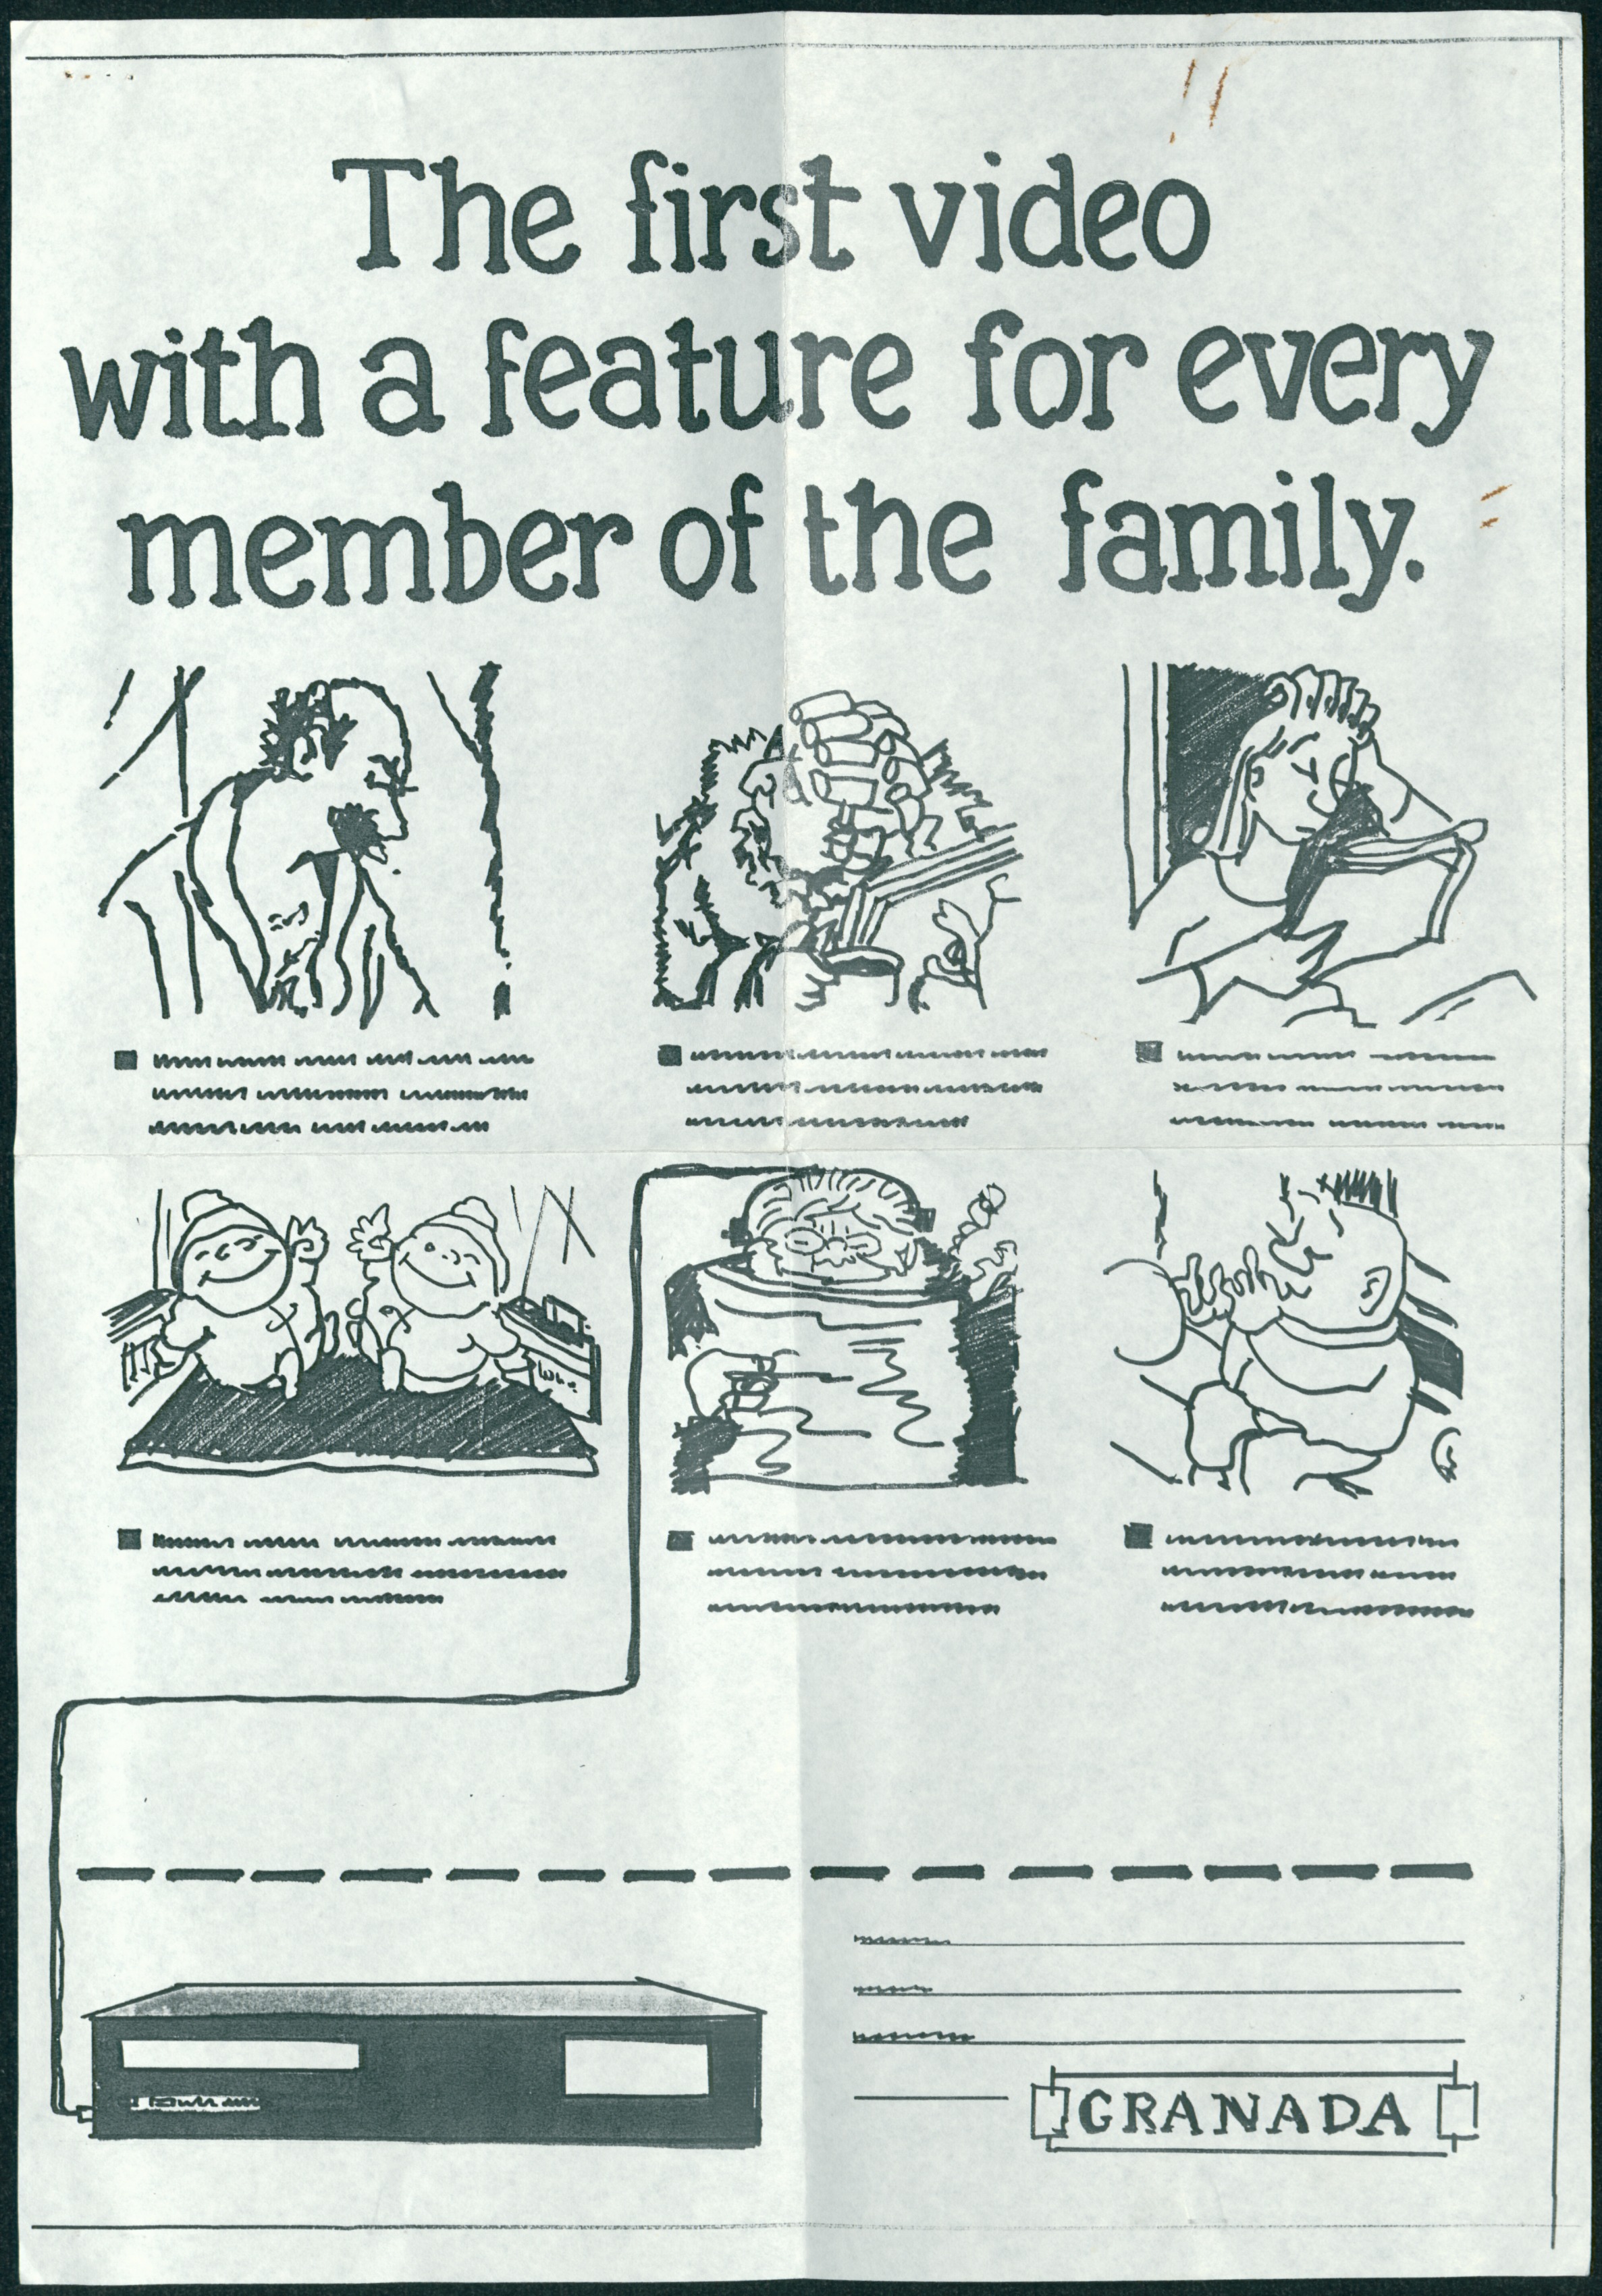 Photocopy of rough draft for proposed advert for Granada video players featuring members of the Giles family; sent by Group X Advertising with request for Giles to draw the final version - Group X Advertising, undated (Image ref: GACS00593)